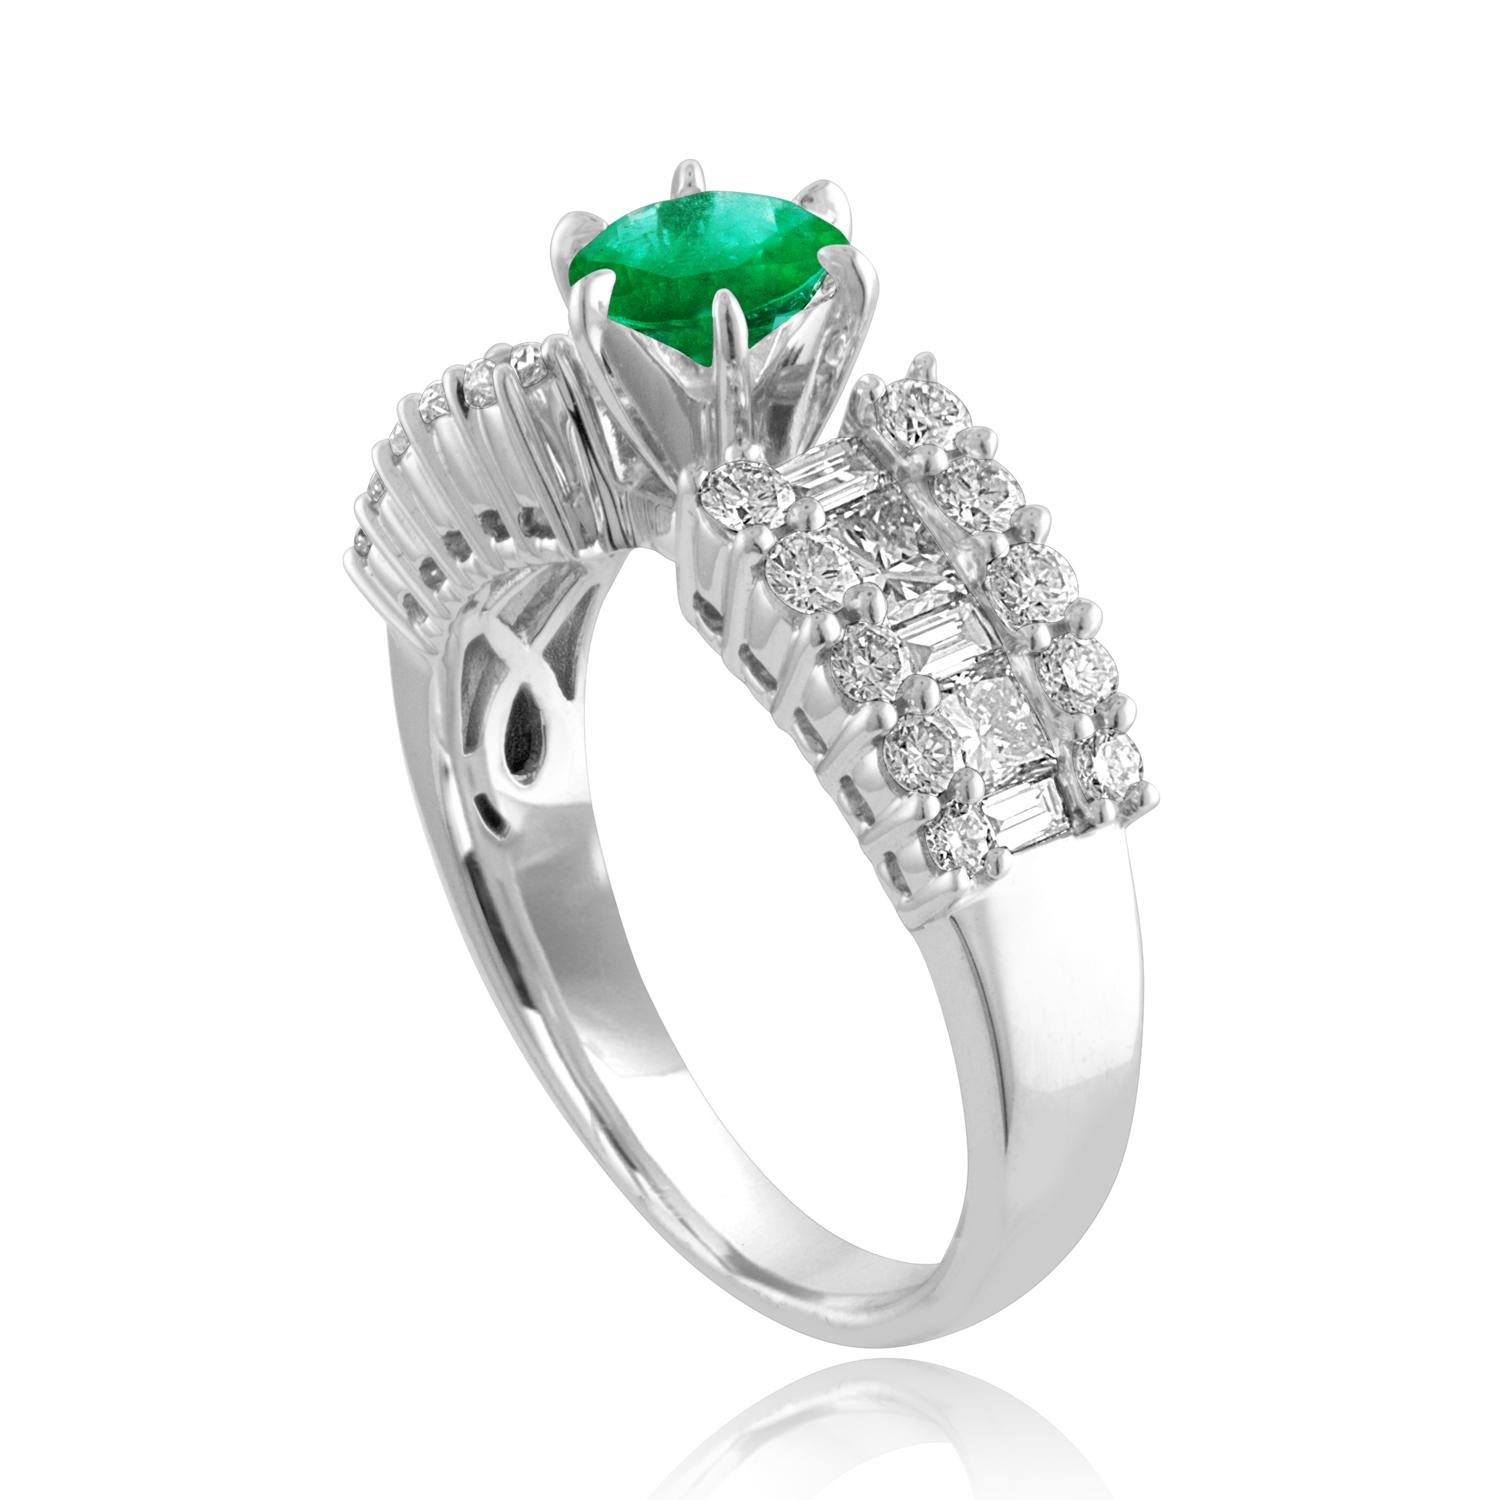 Beautiful Round Emerald Gold Ring
The ring is 18K White Gold.
The Center is a beautiful round cut 0.90 Carat Emerald.
The Emerald is AGL certified.
There are 1.65 Carats in Diamonds F/G VS/SI
The ring is a size 6.50, sizable.
The ring weighs 6.4